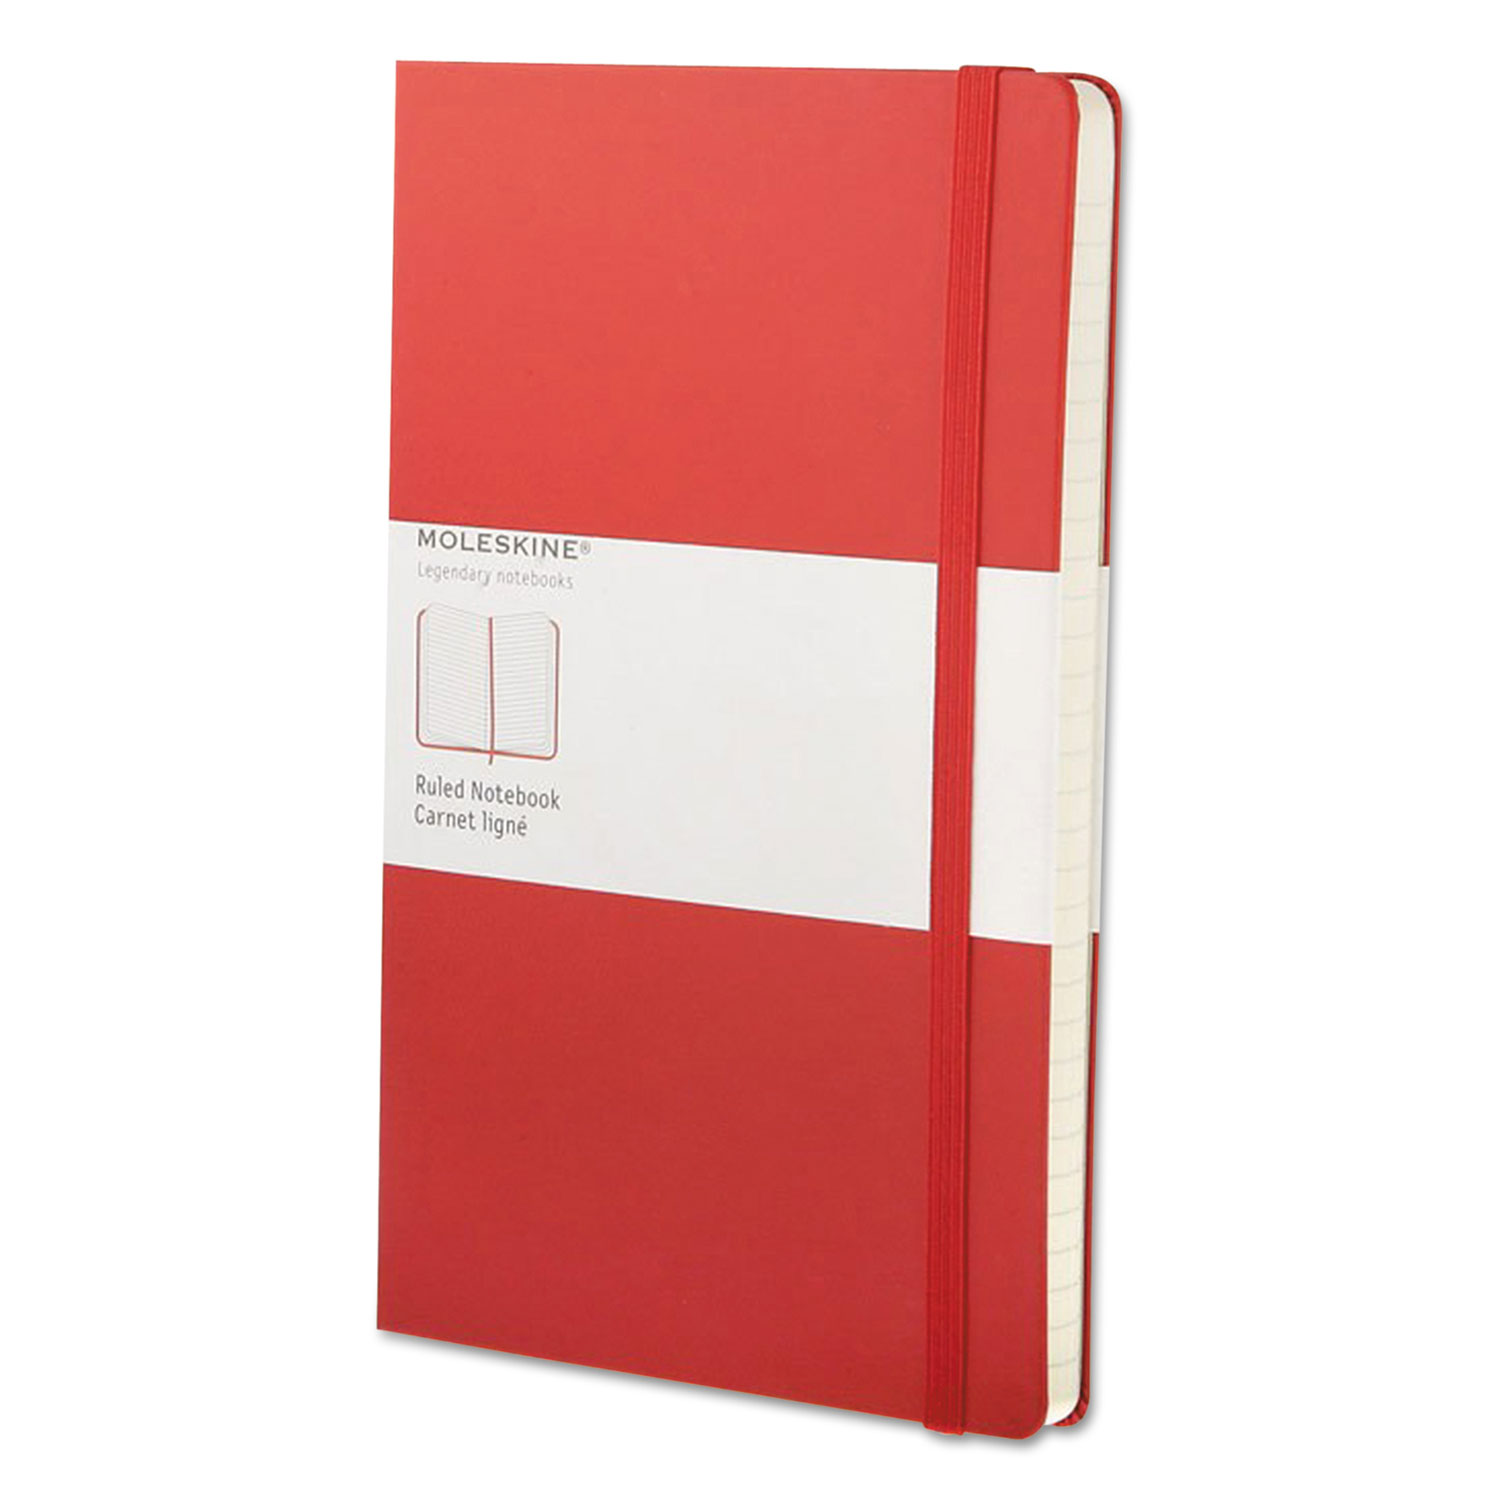  Moleskine 9788862930048 Classic Colored Hardcover Notebook, Narrow Rule, Red Cover, 8.25 x 5, 240 Sheets (HBGQP060R) 